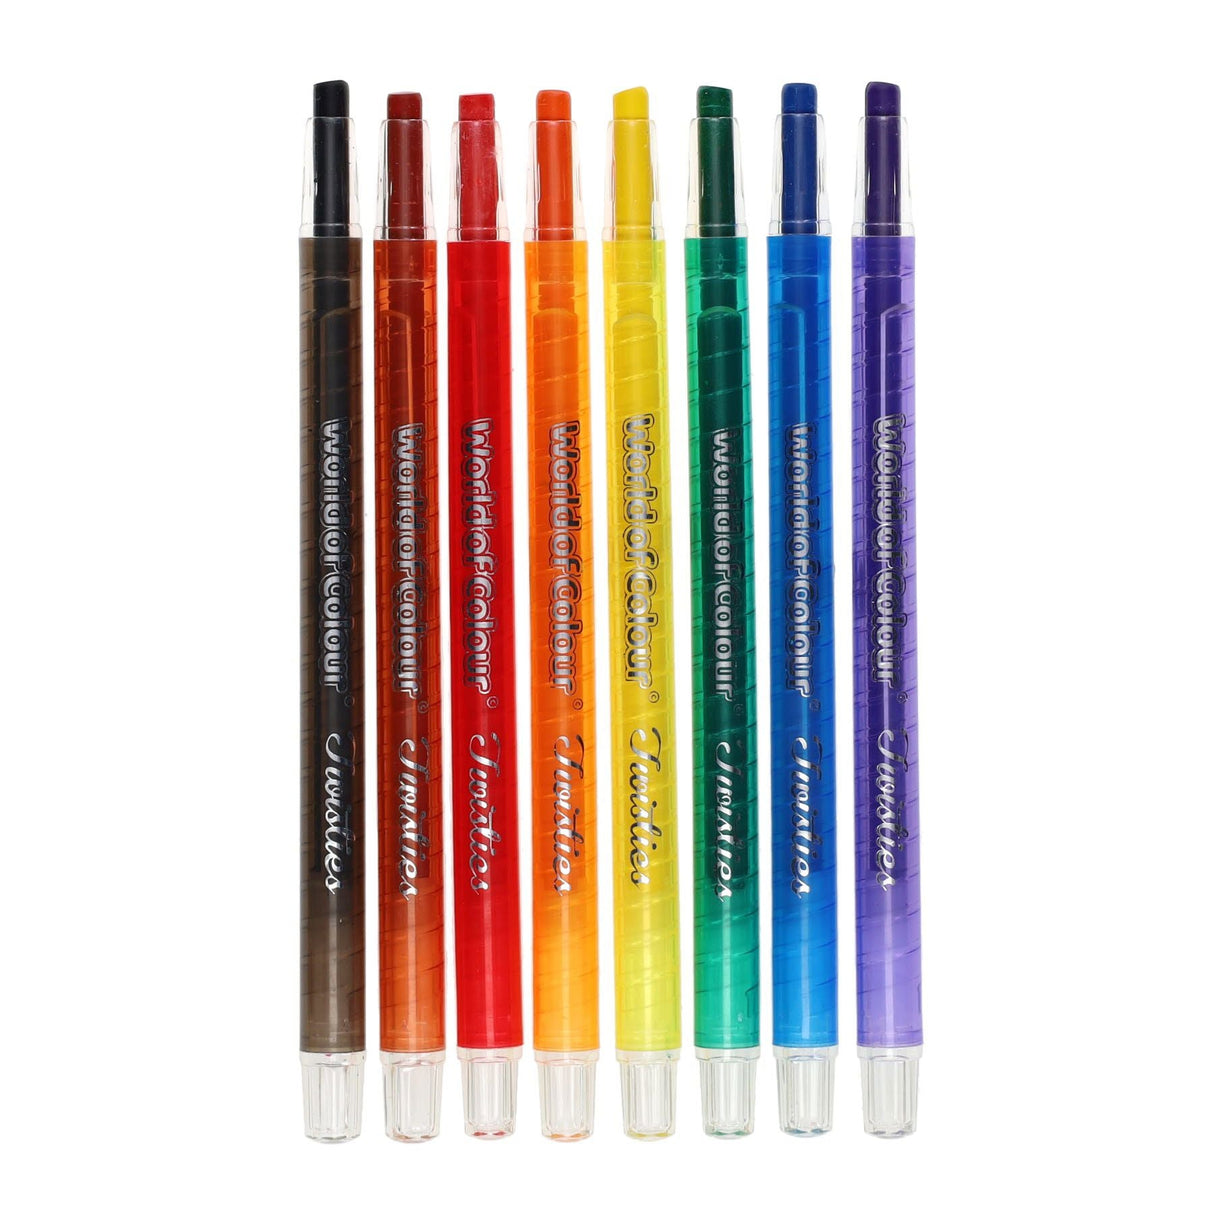 World of Colour Twisties Crayons - Pack of 8 | Stationery Shop UK